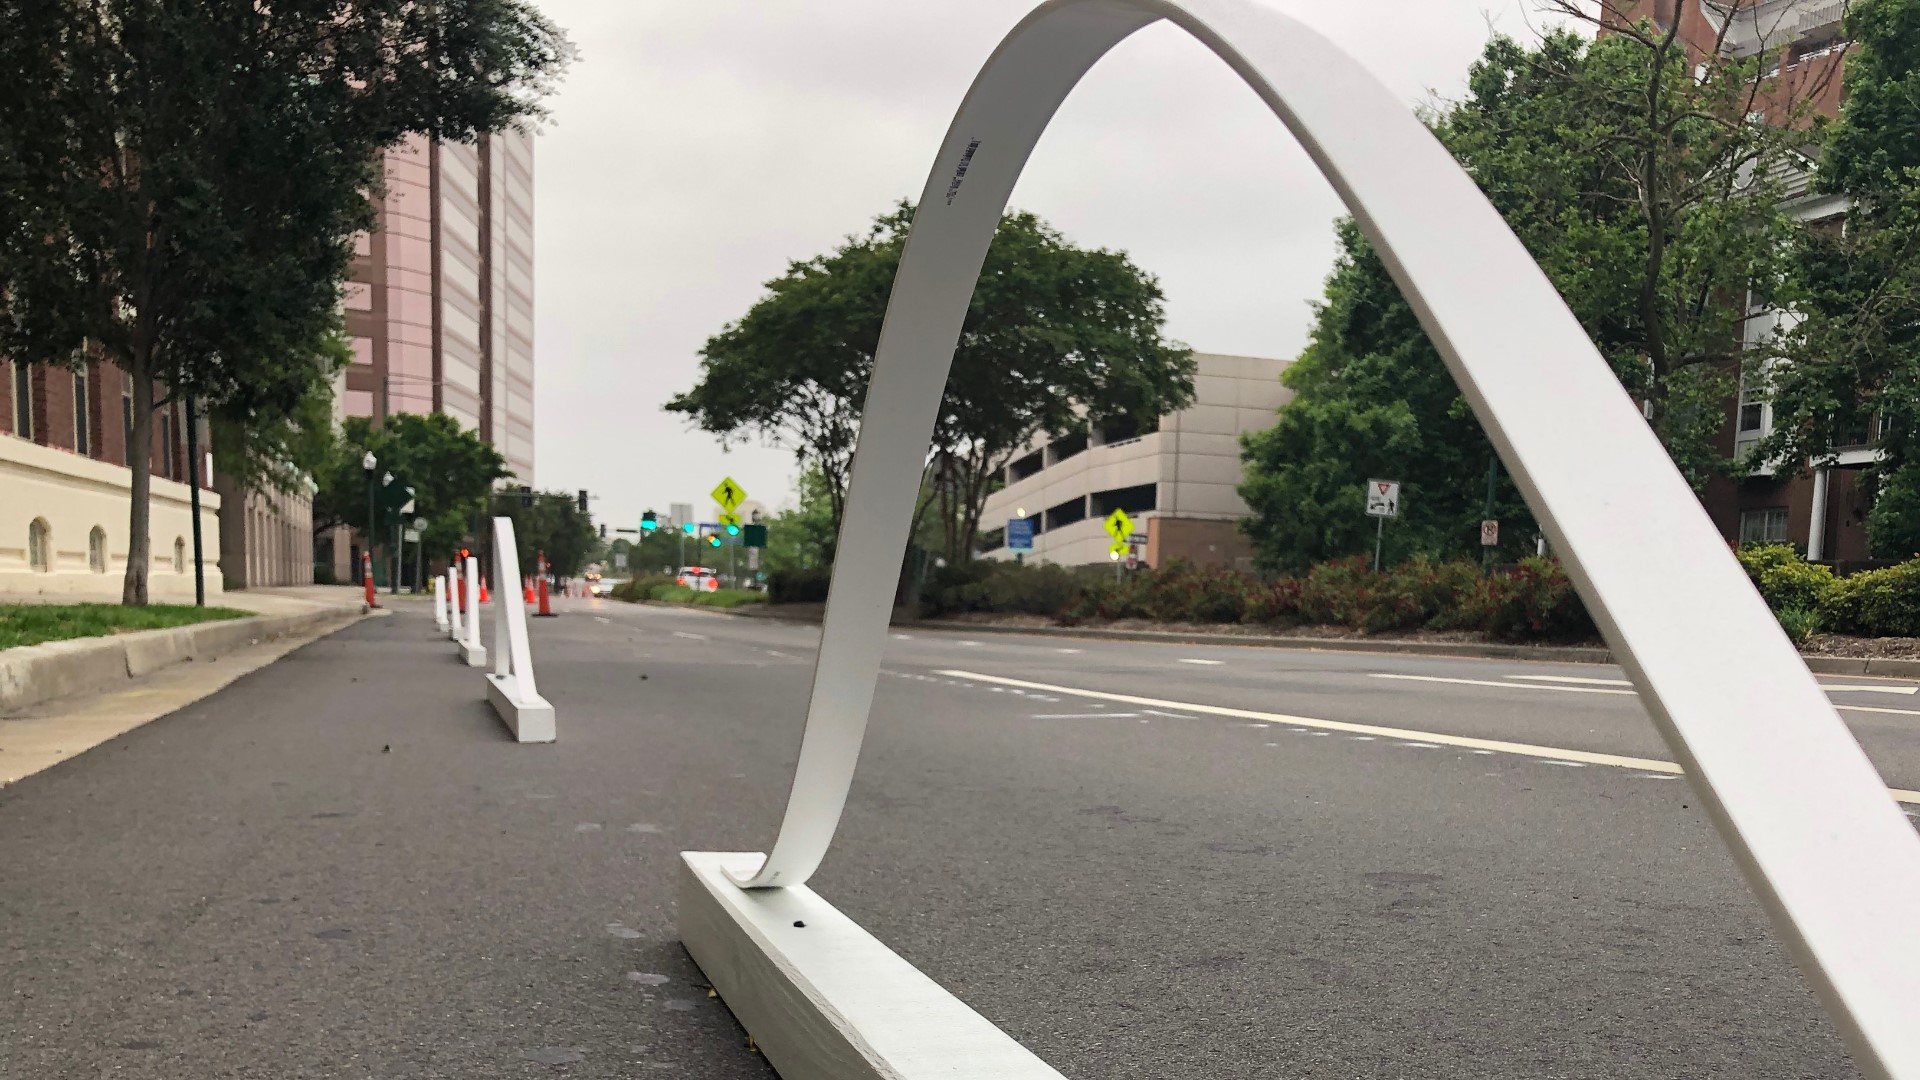 Boush Street is now down to one lane and there are dozens of wave-shaped markers outlining new parking spots. It’s part of a new city initiative called OpenNorfolk.